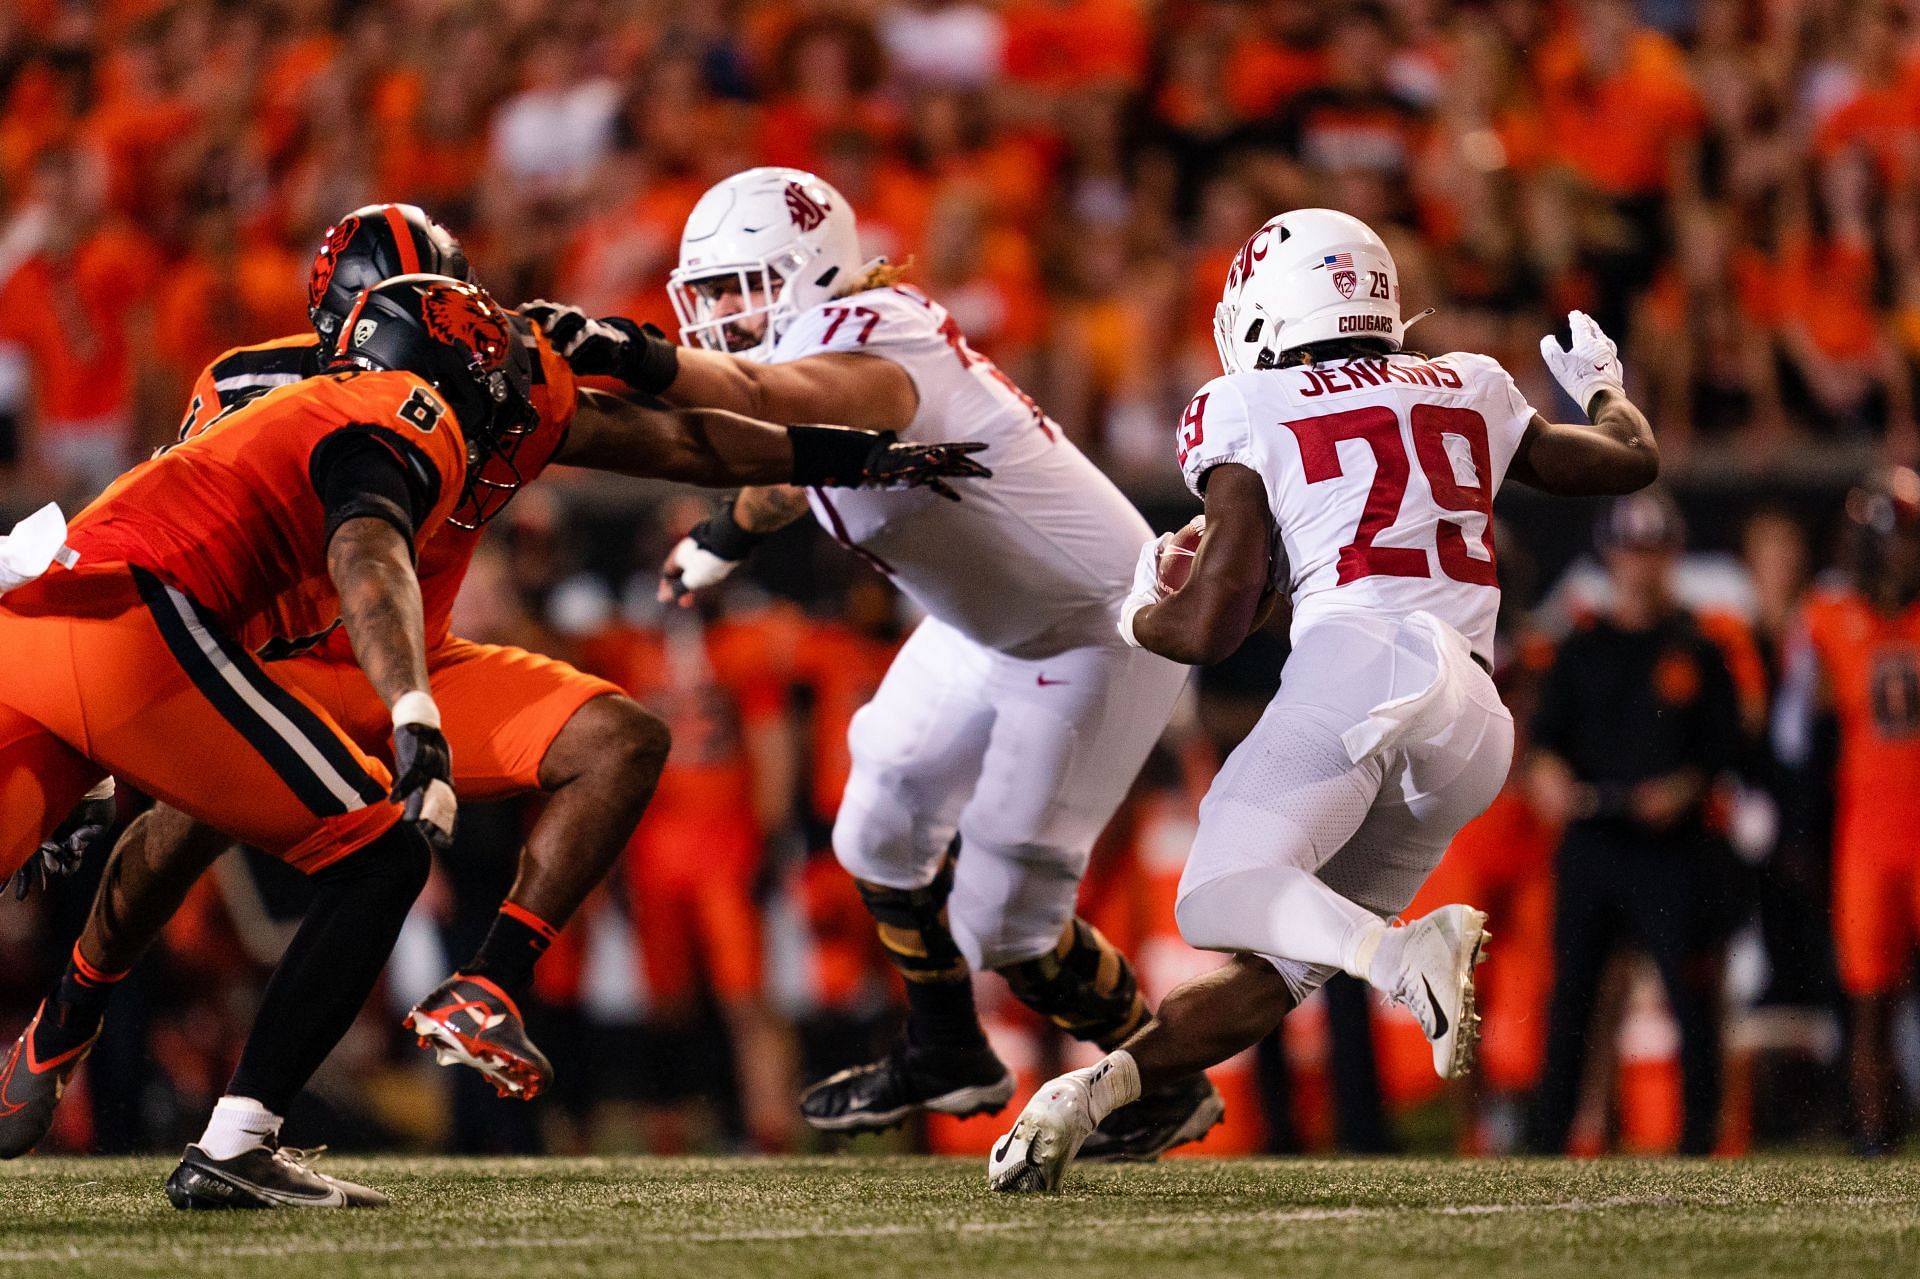 Will Oregon State and Washington State join the Mountain West, quashing